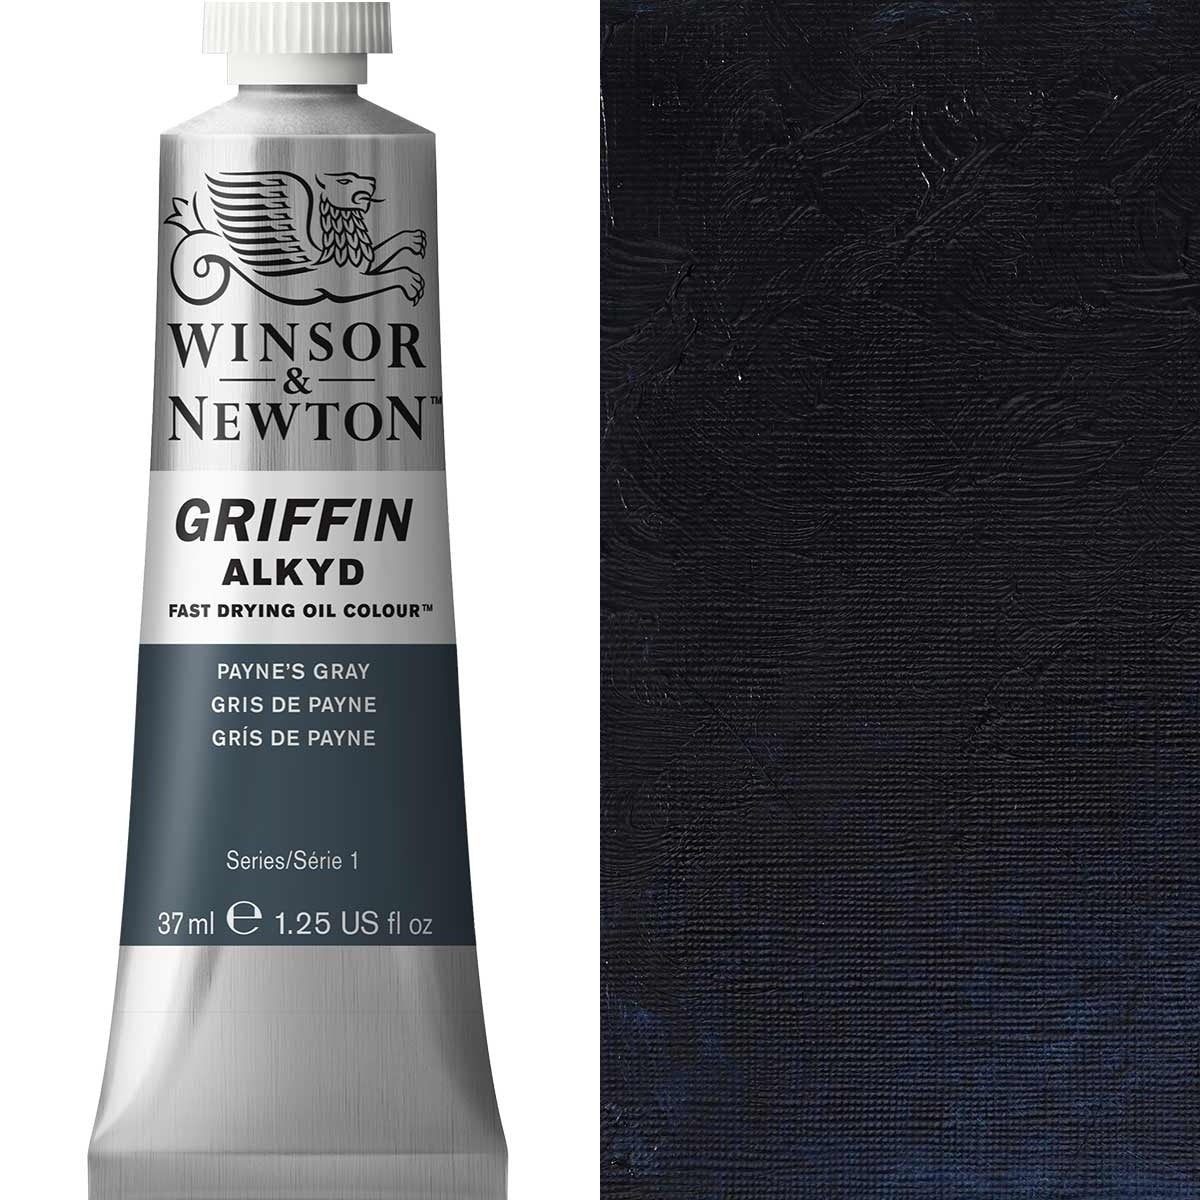 Winsor and Newton - Griffin ALKYD Oil Colour - 37ml - Paynes Grey